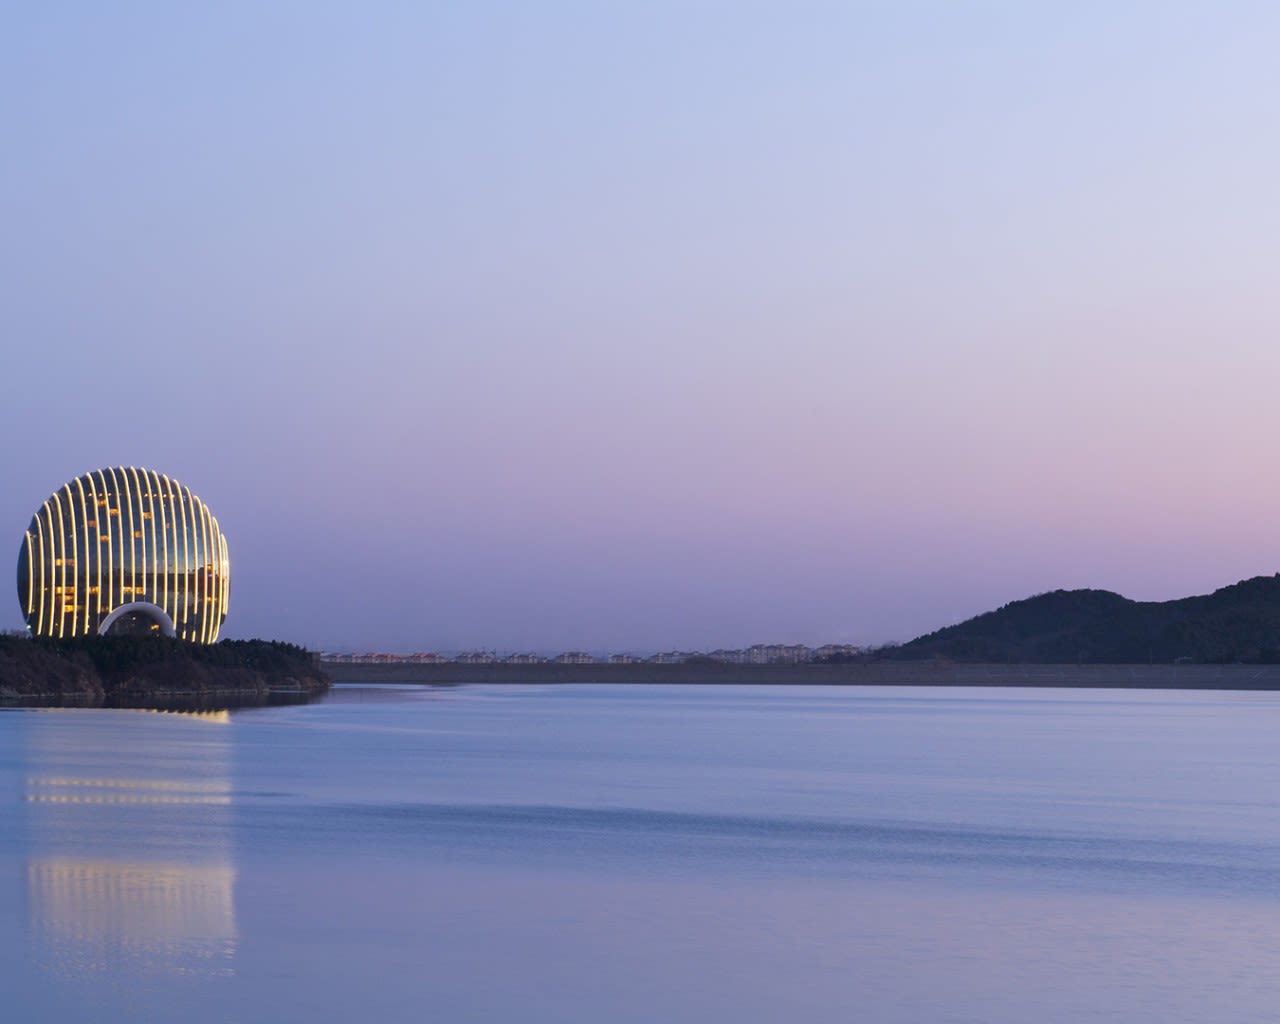 The brand's largest property in China, the Sunrise Kempinski complex sits on 14 square kilometers of land next to Yanqi Lake, 60 kilometers from Beijing's city center.  